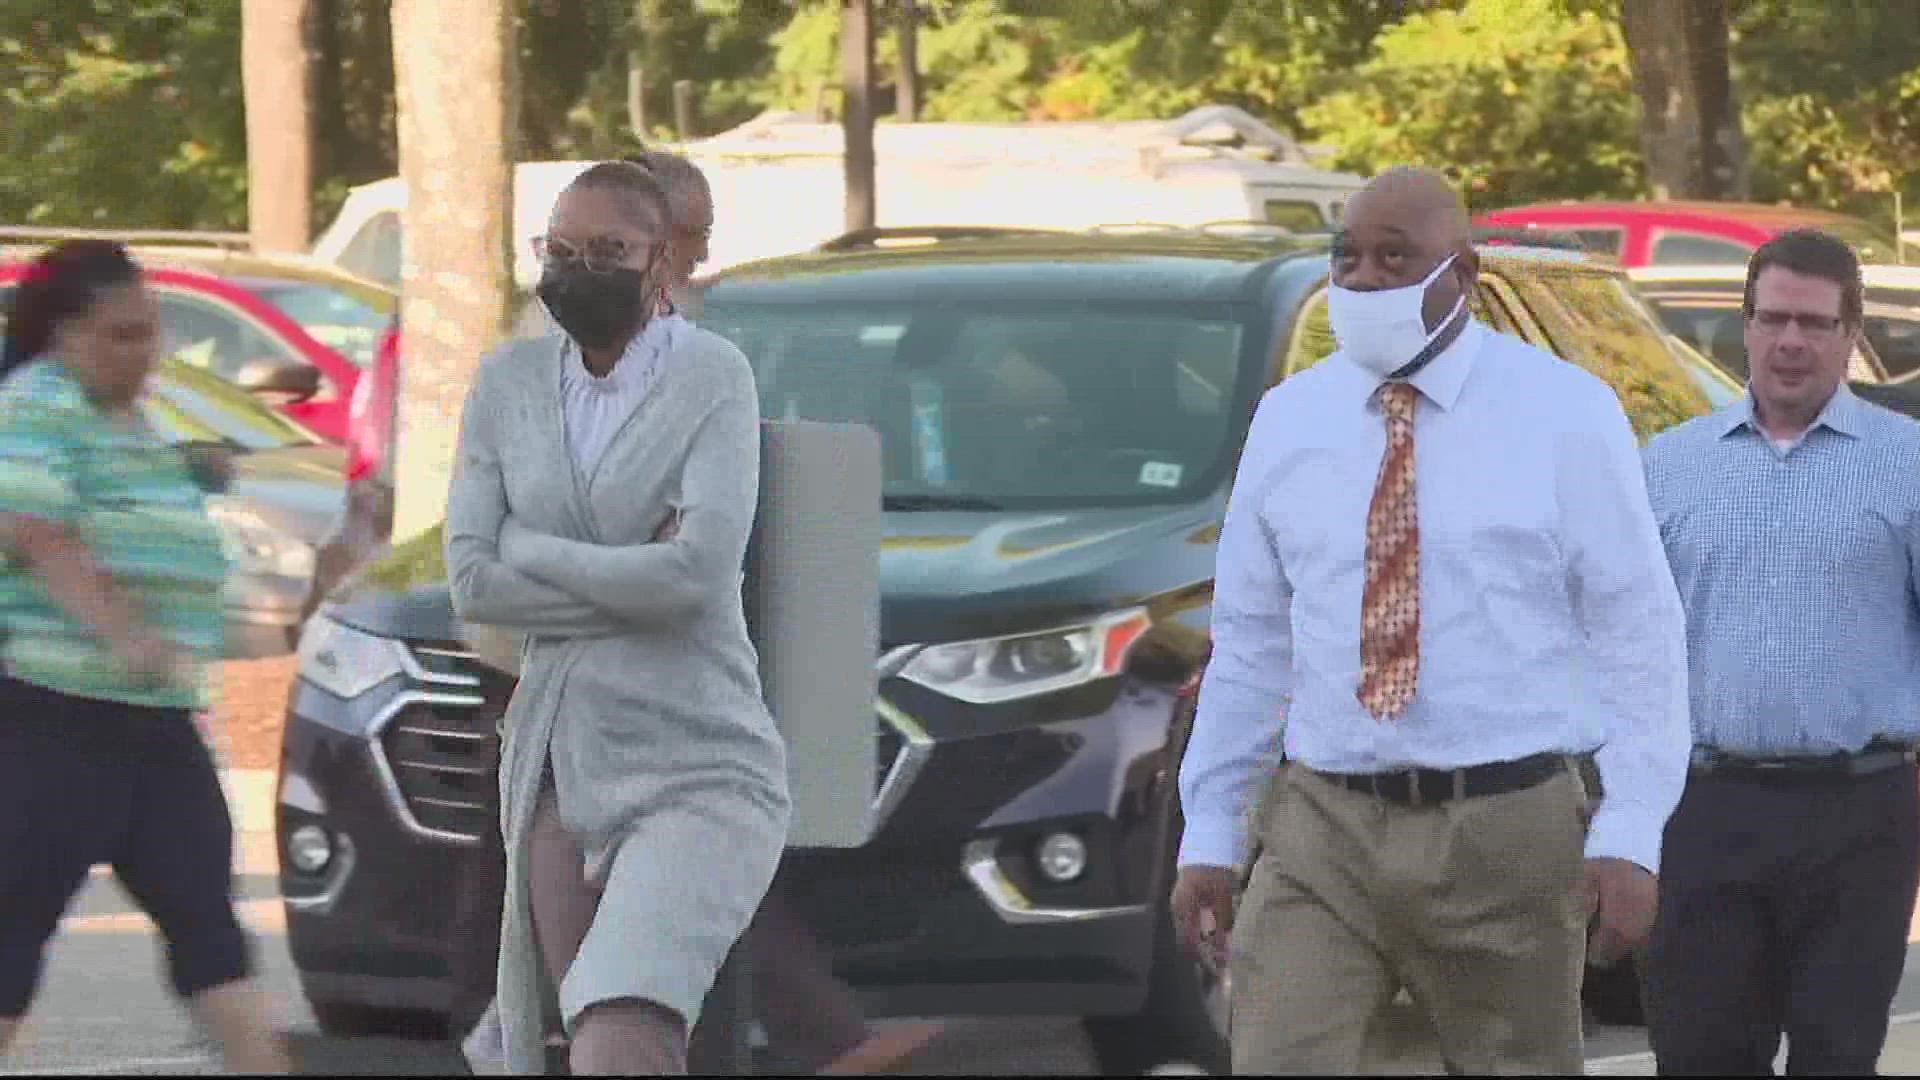 Tuesday, former Fairfax County Public Schools counselor Darren Thornton was in a Chesterfield County, Virginia courtroom on charges of soliciting prostitution.